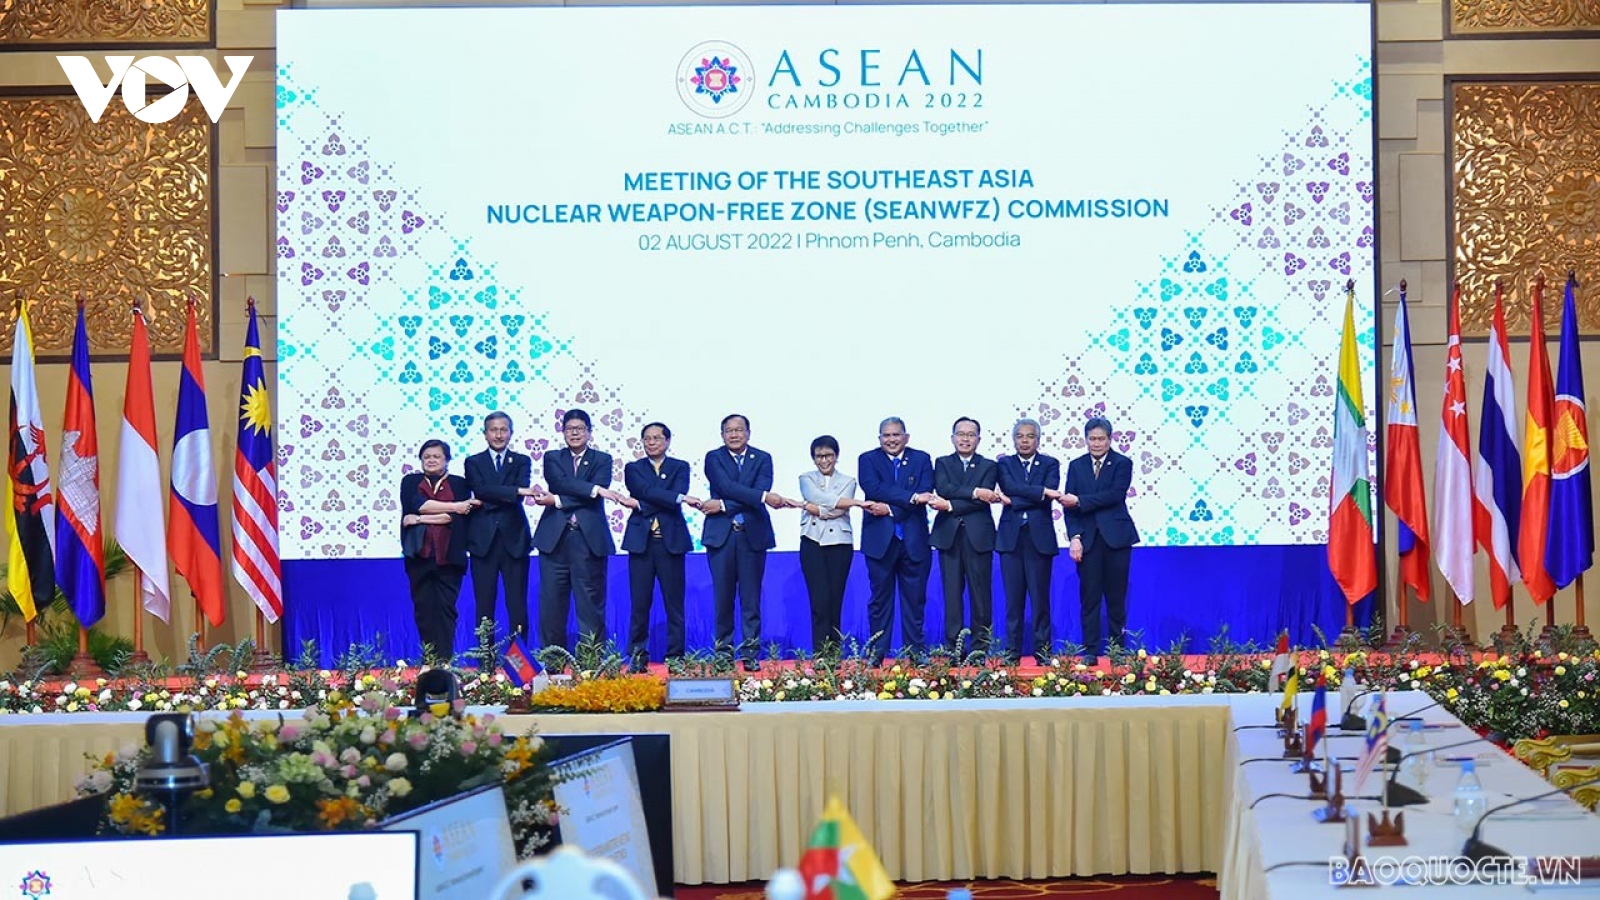 ASEAN Ministers commit to SEA Nuclear Weapon-Free Zone